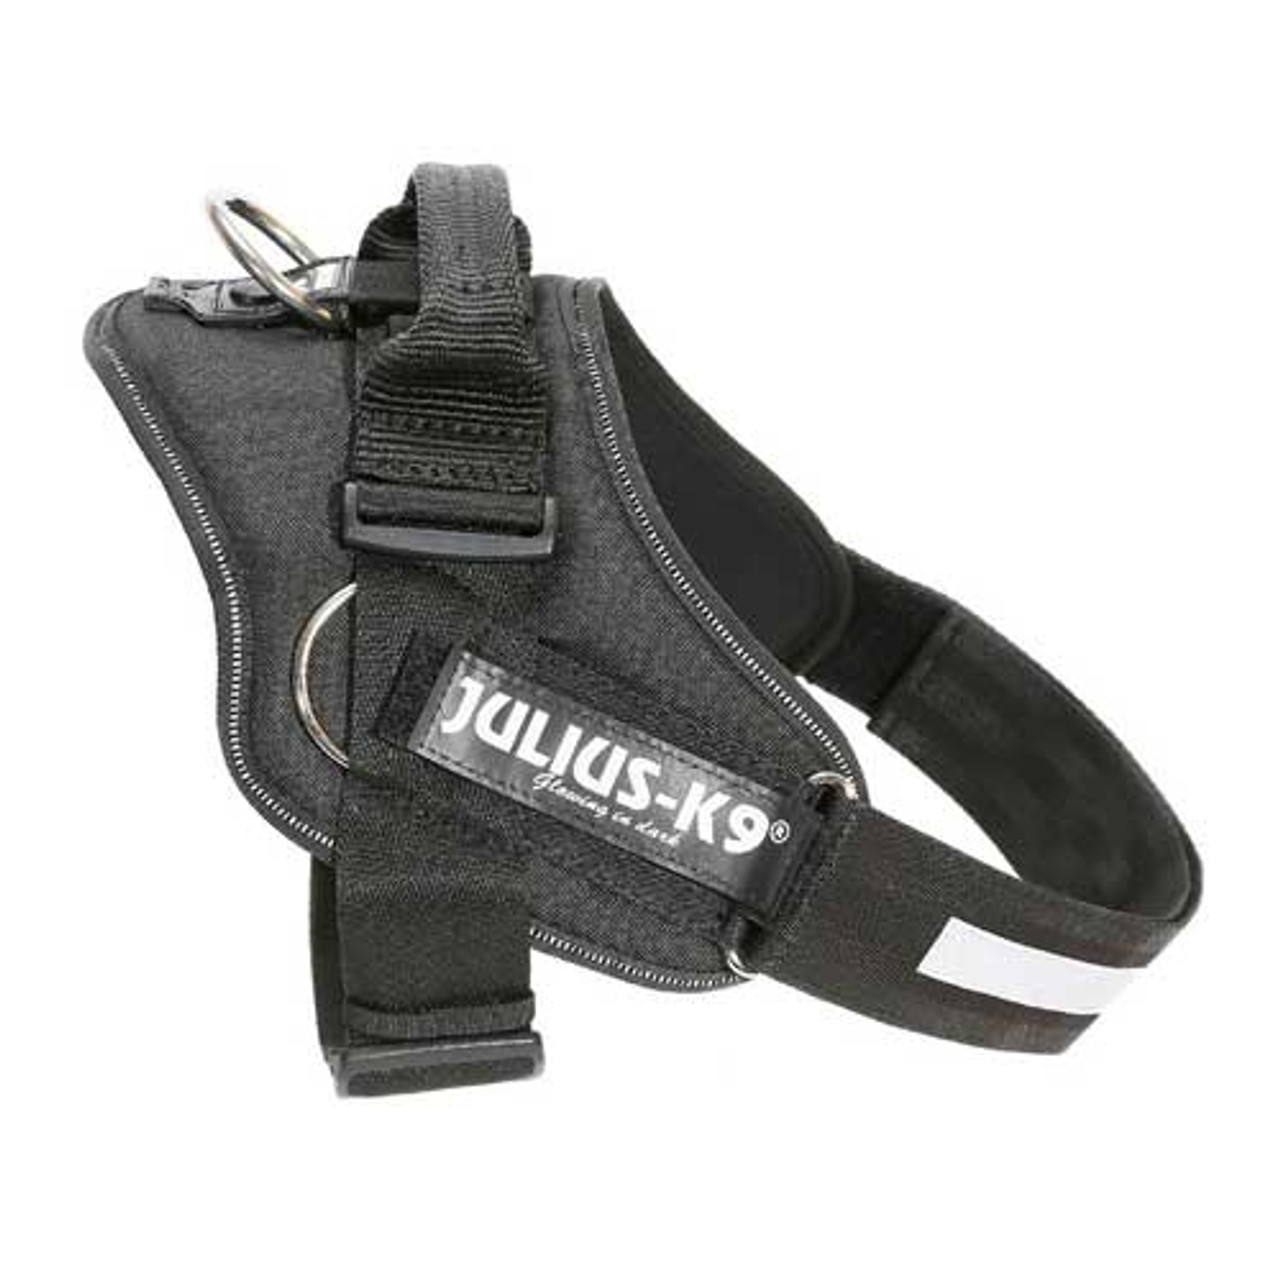 Julius-K9 IDC-Powerharness For Dogs With Siderings "Julius-K9" Illuminated Hook & Loop Patches Size. 3, Black